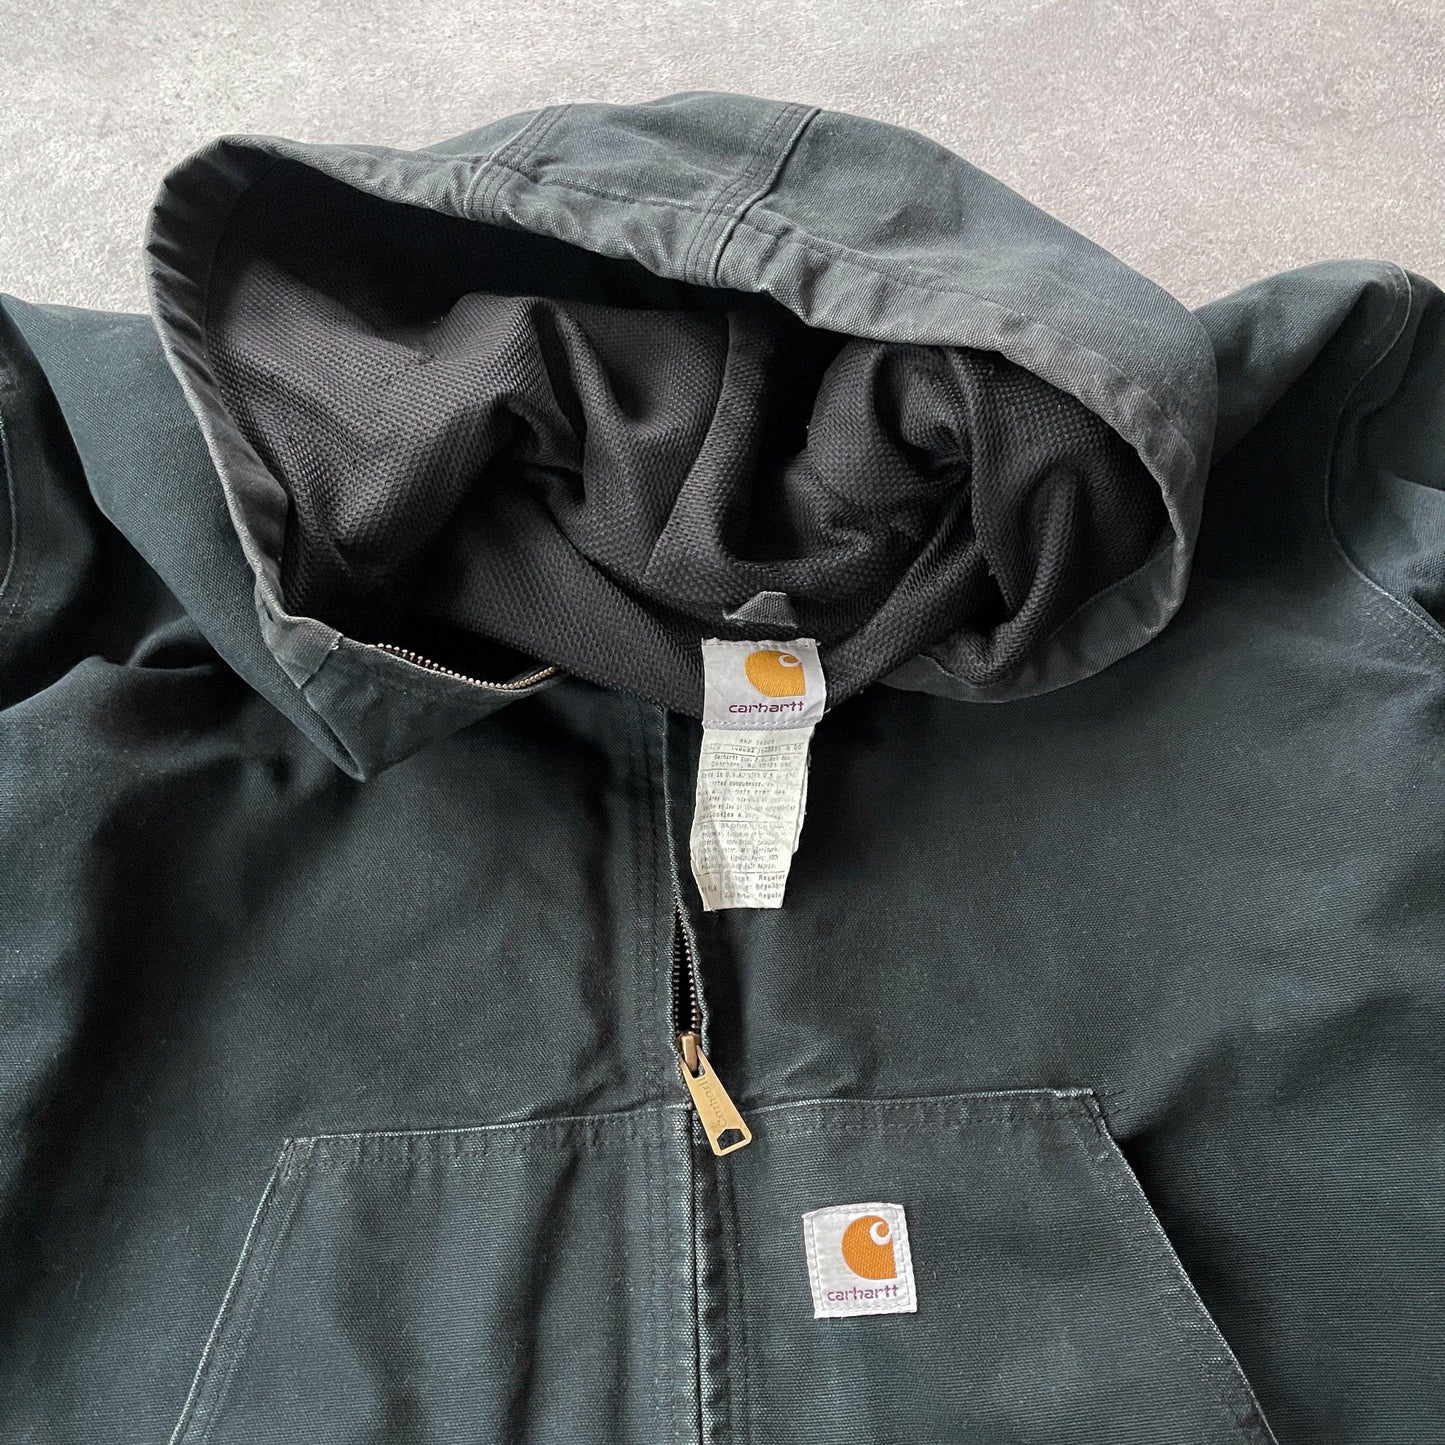 Carhartt 2009 heavyweight active hooded jacket (XL) - Known Source